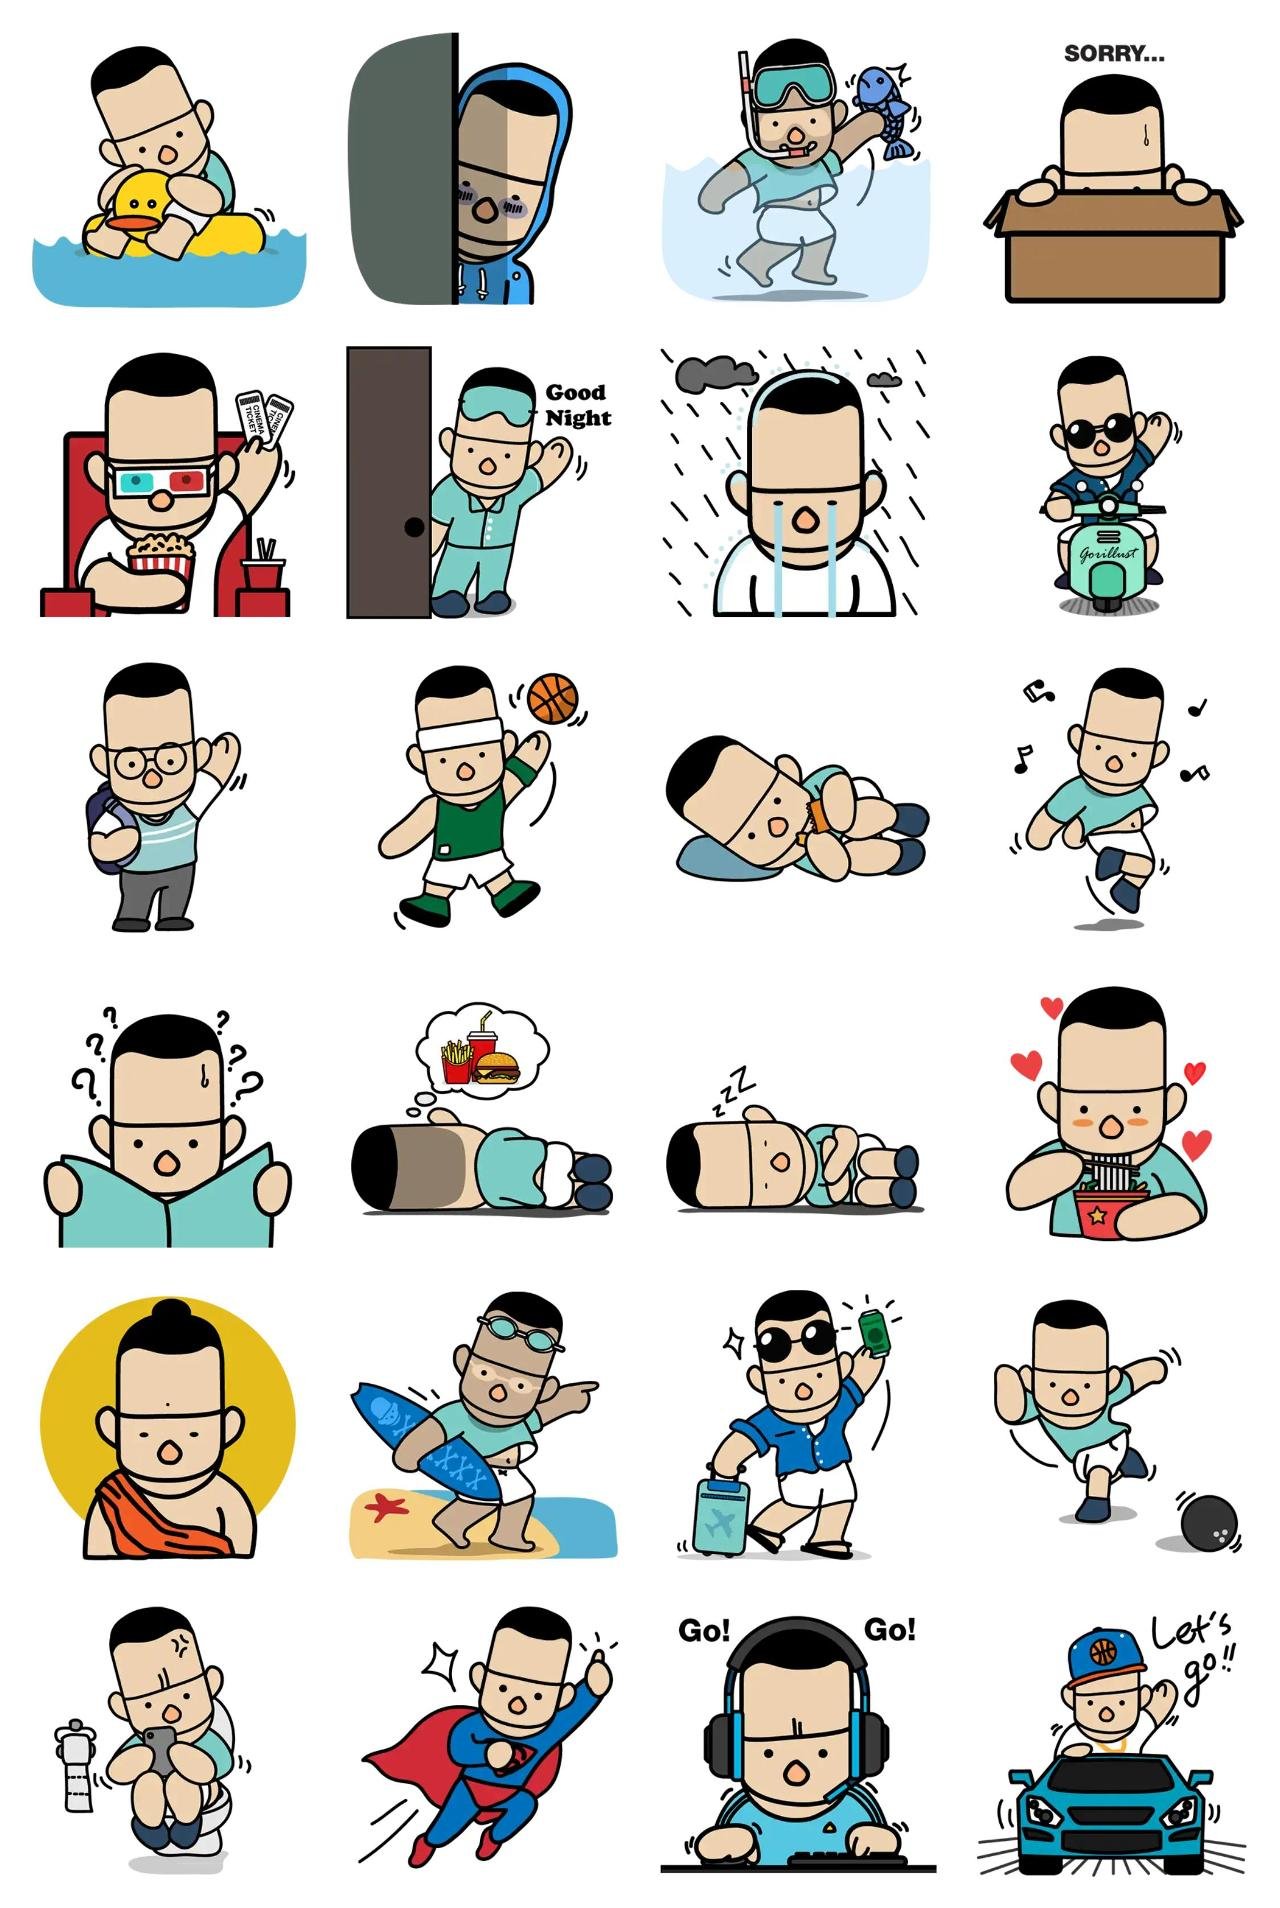 WOOKI 2 Animation/Cartoon,People sticker pack for Whatsapp, Telegram, Signal, and others chatting and message apps